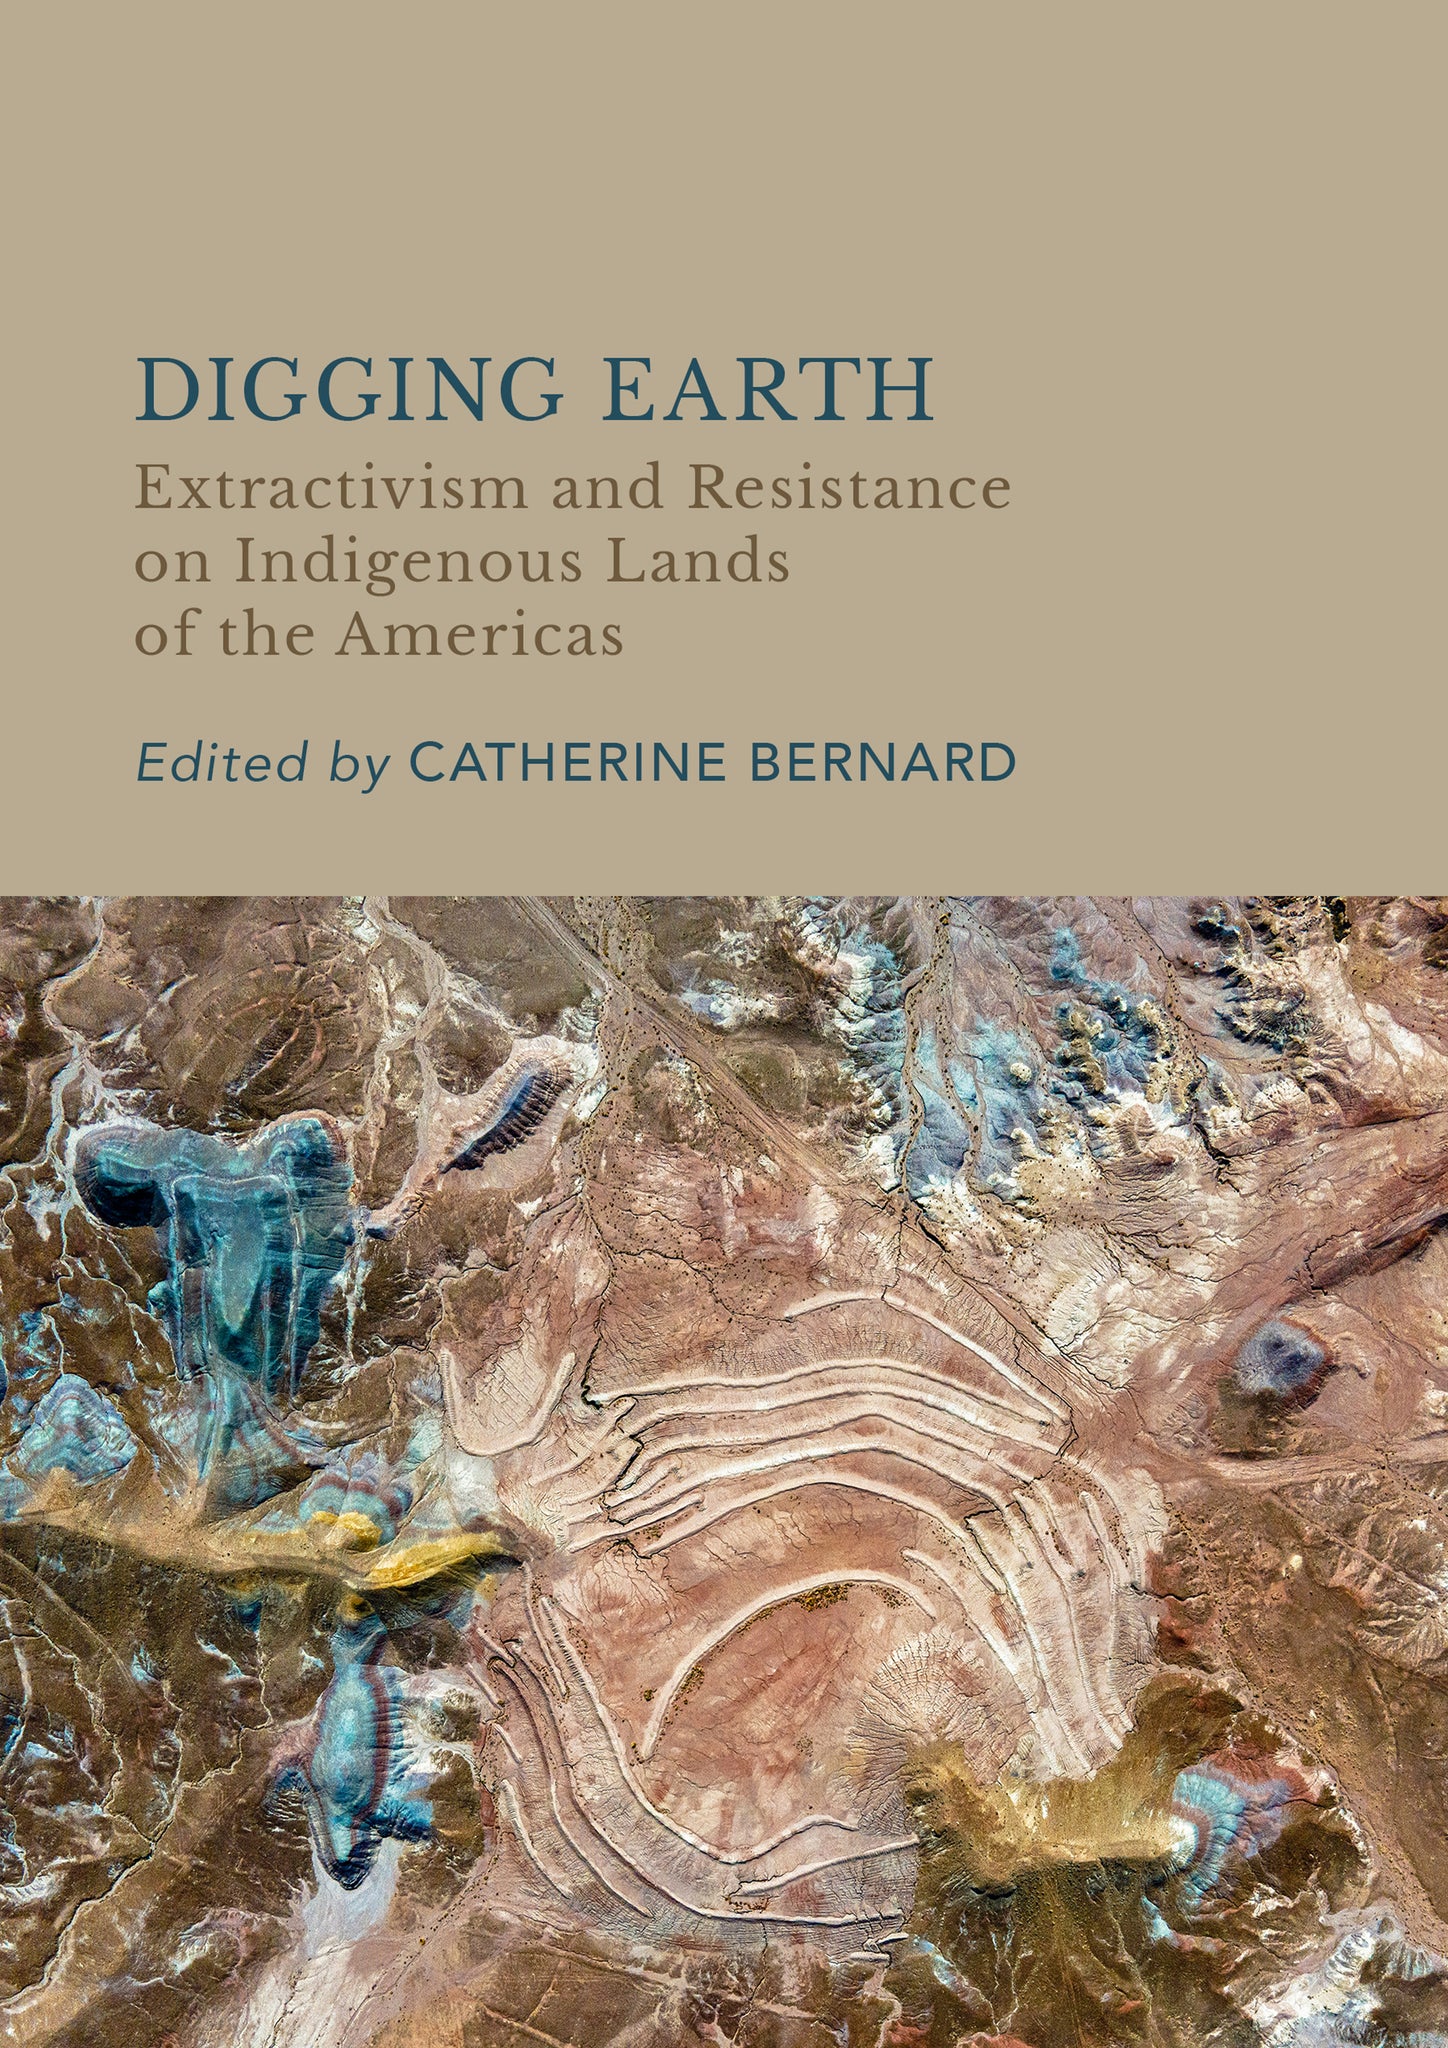 Digging Earth: Extractivism and Resistance on Indigenous Lands of the Americas